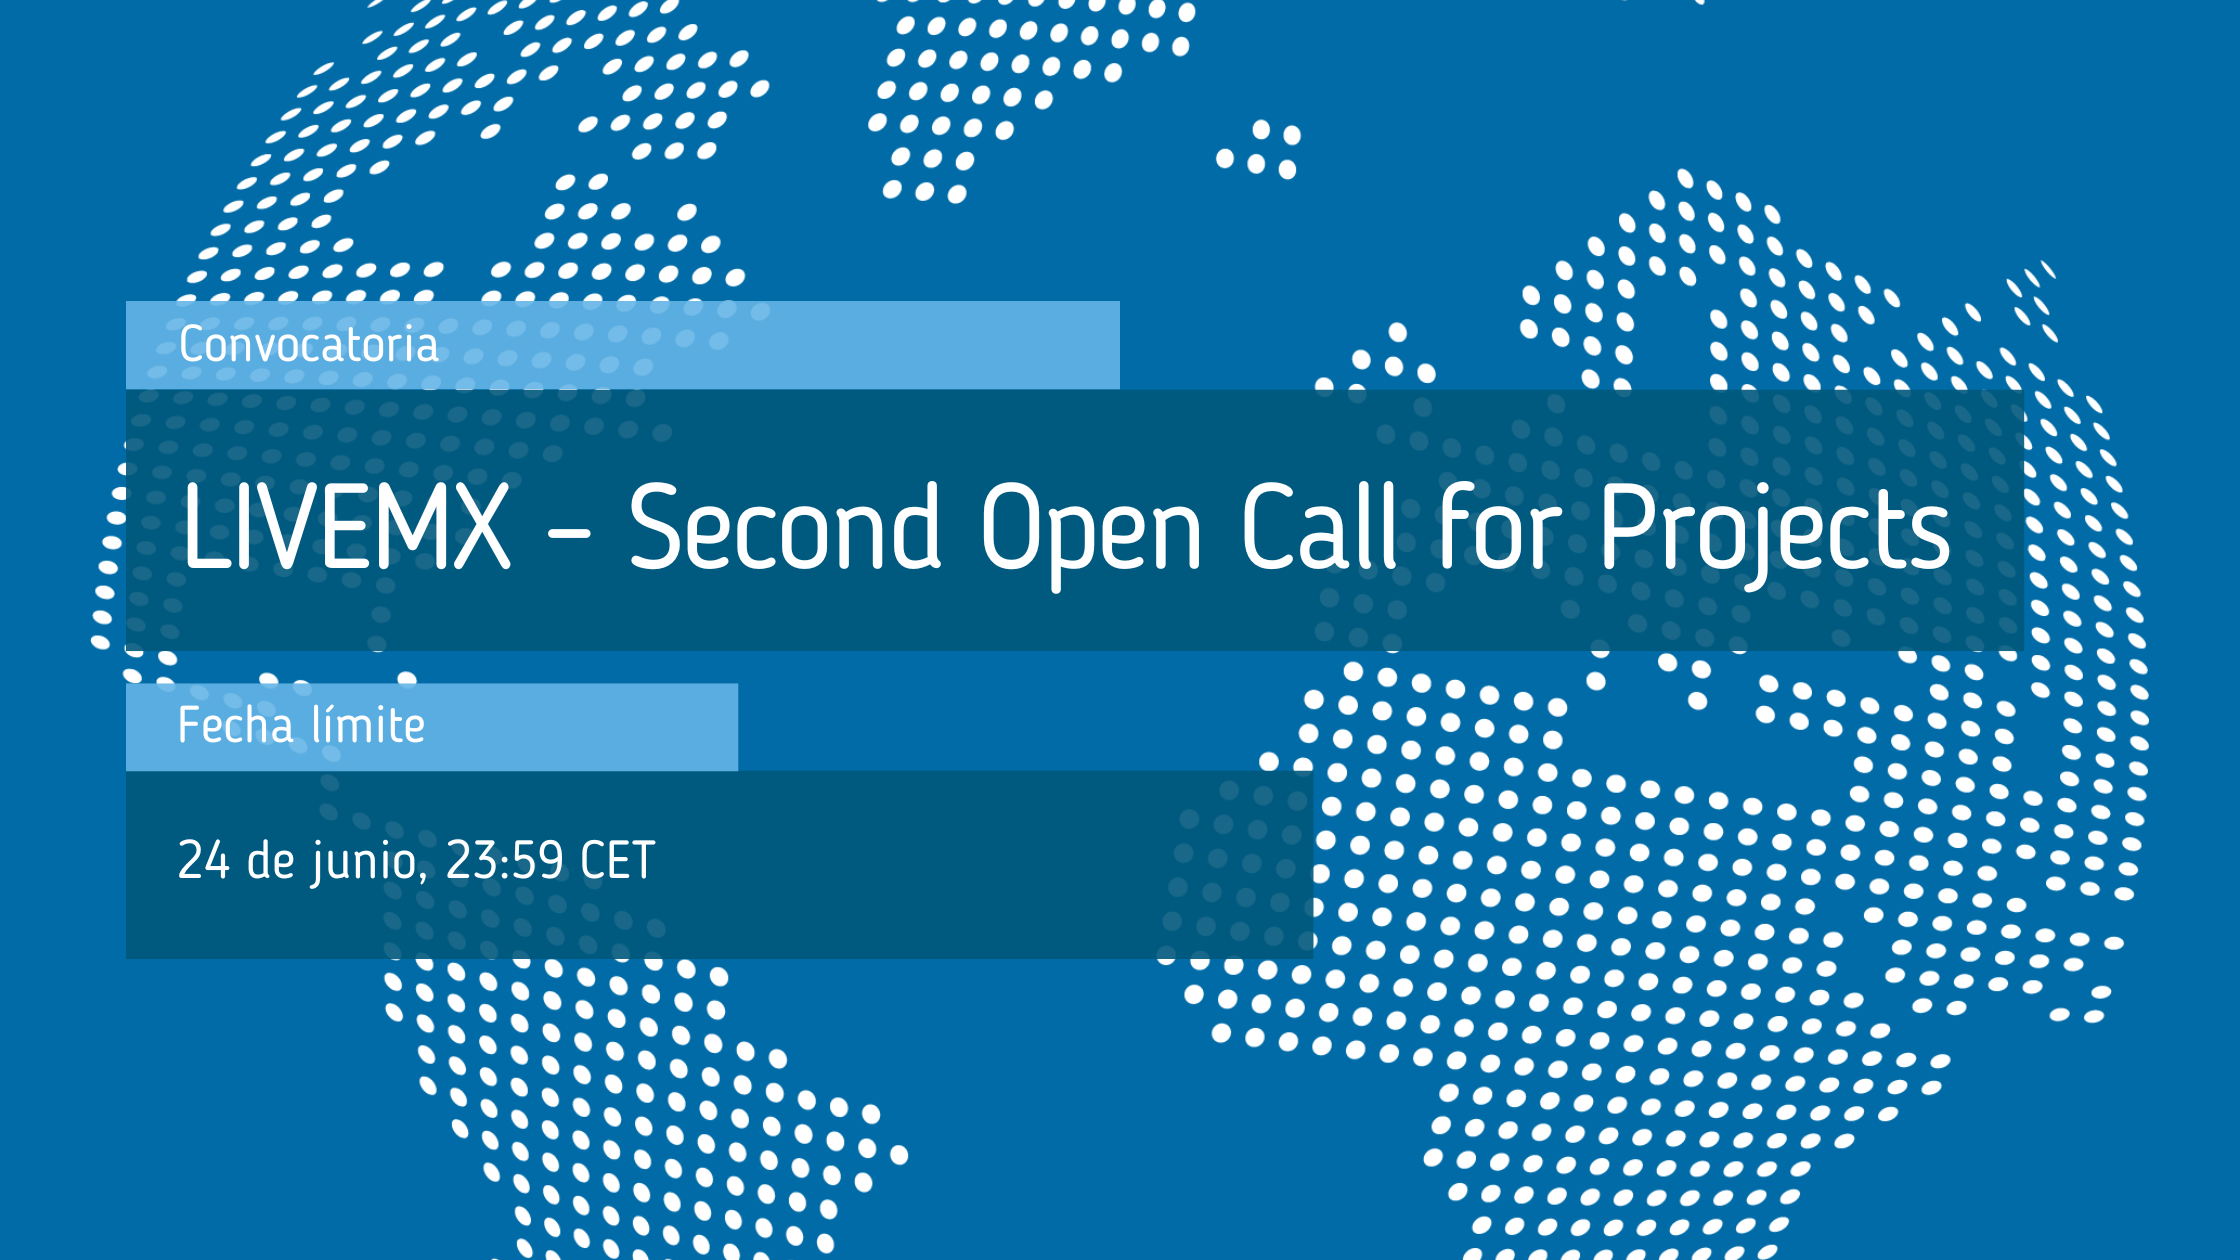 LIVEMX_Second_Open_Call_for_Projects